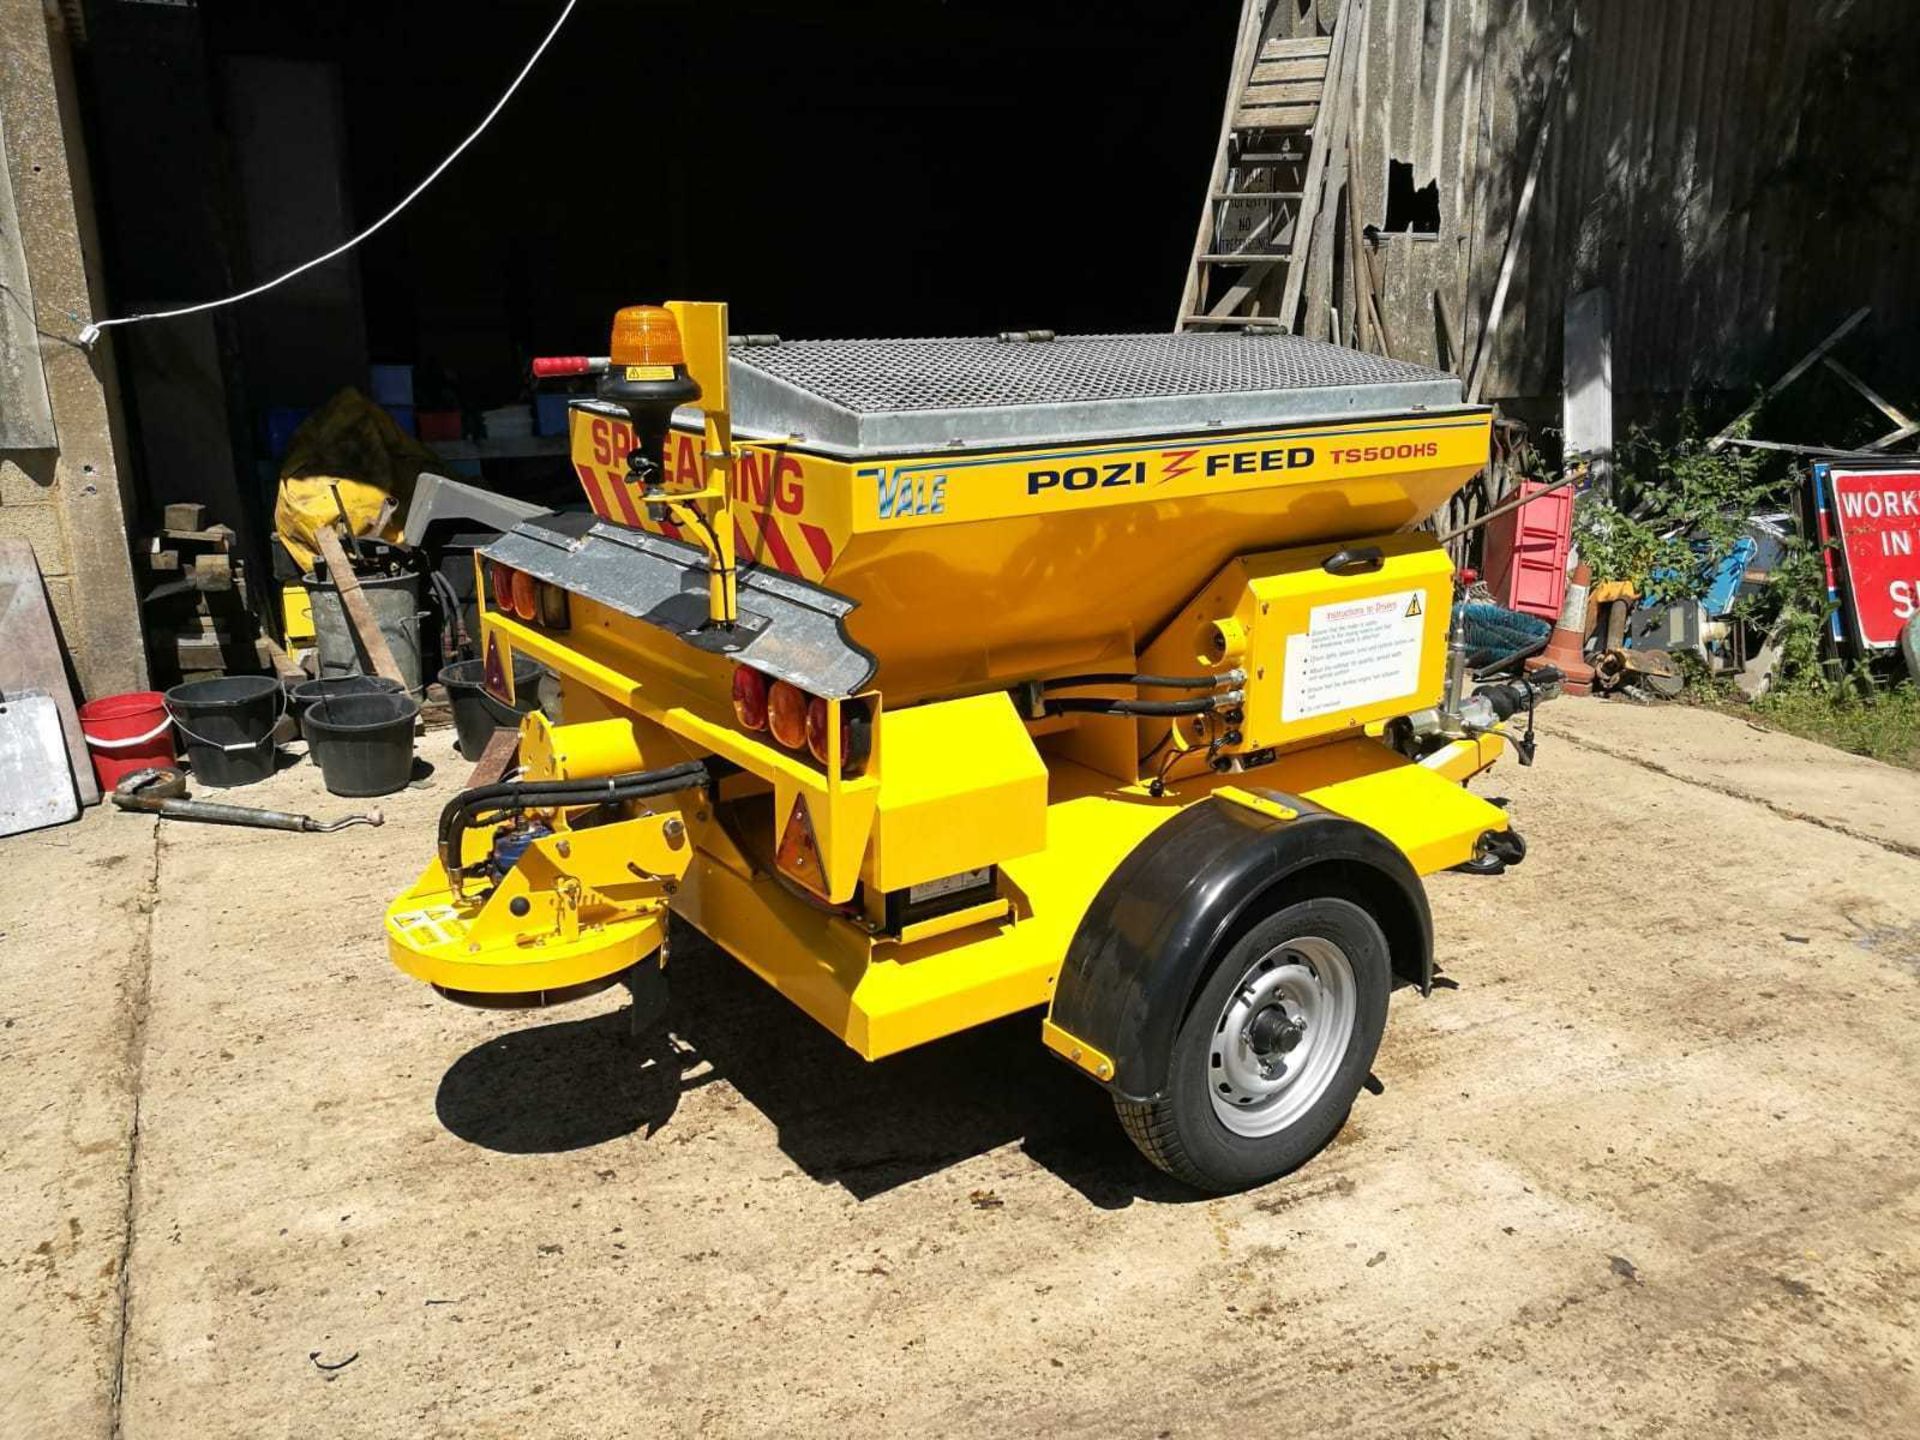 VALE POZI FEED TS500HS GRITTING TRAILER, SINGLE AXLE, 1300 GTW *PLUS VAT* - Image 4 of 5